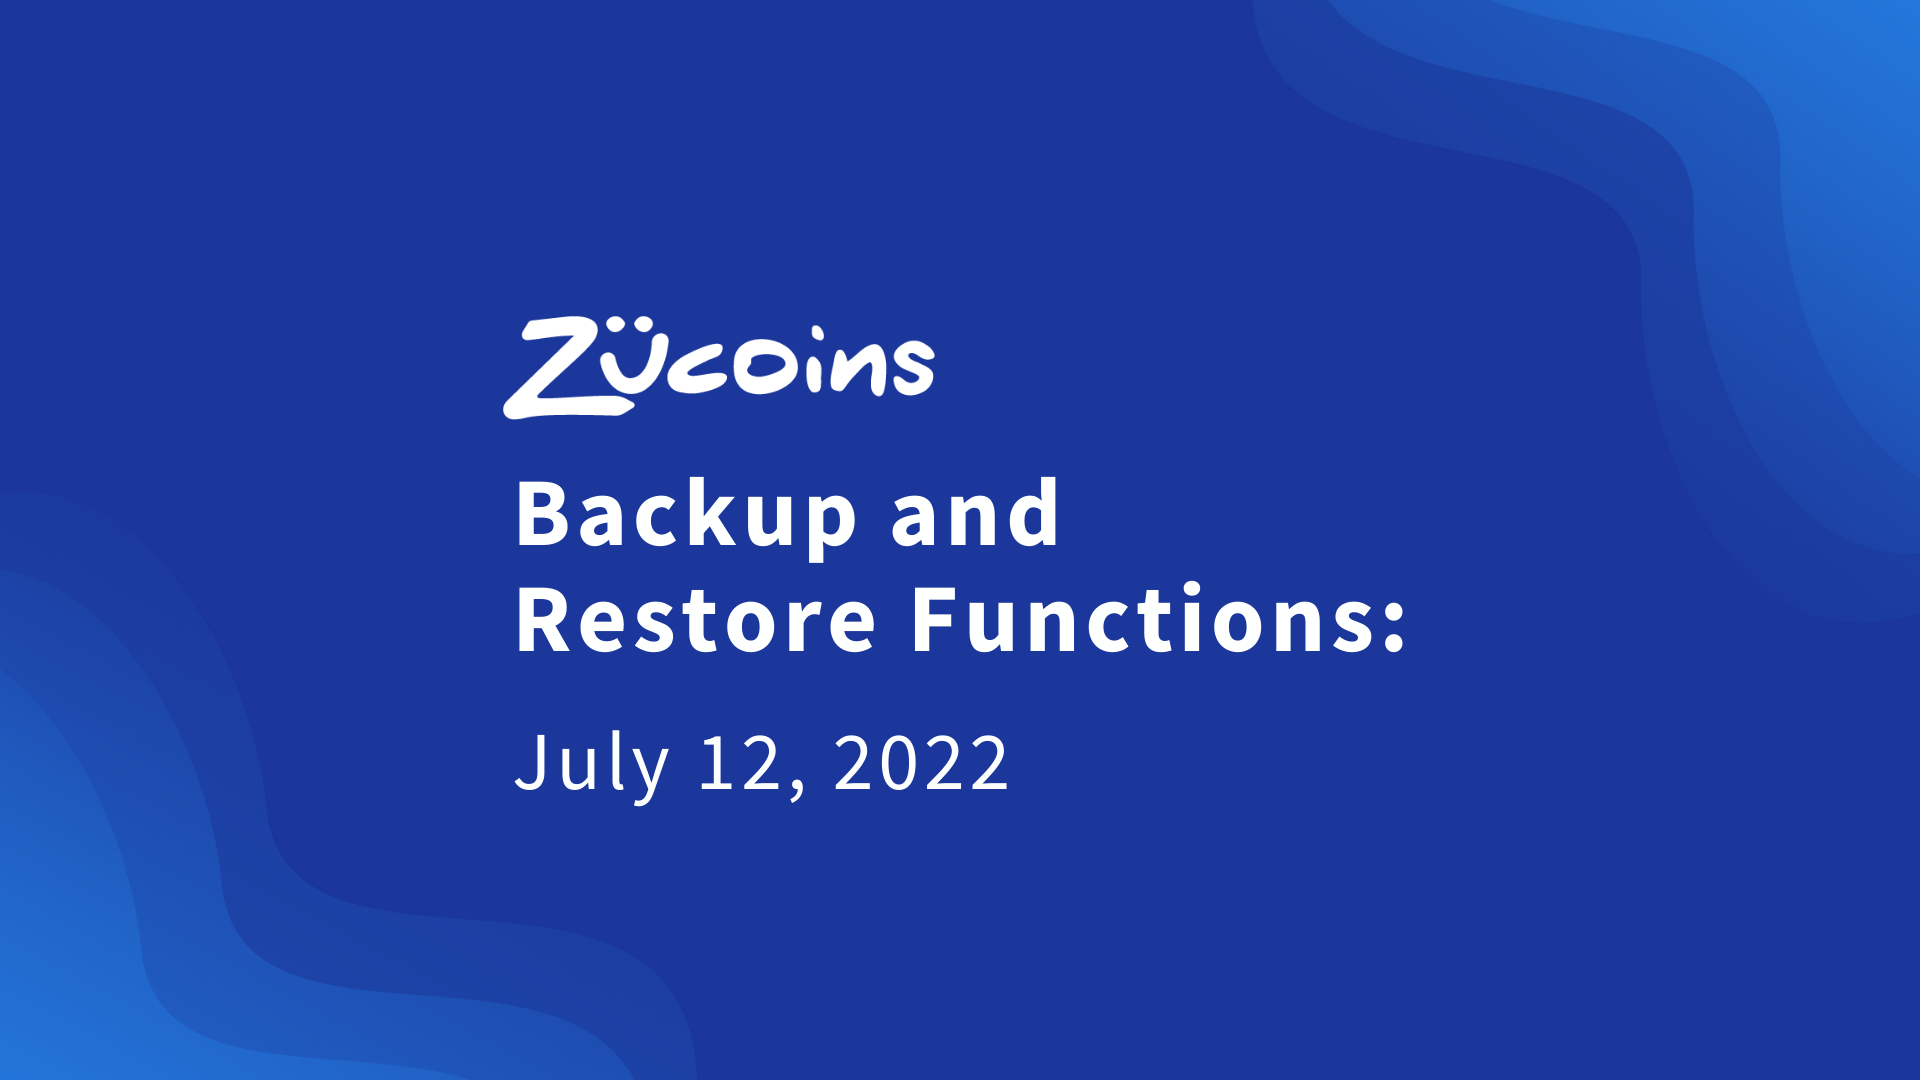 Zucoins Backup & Restore Functions - July 12, 2022